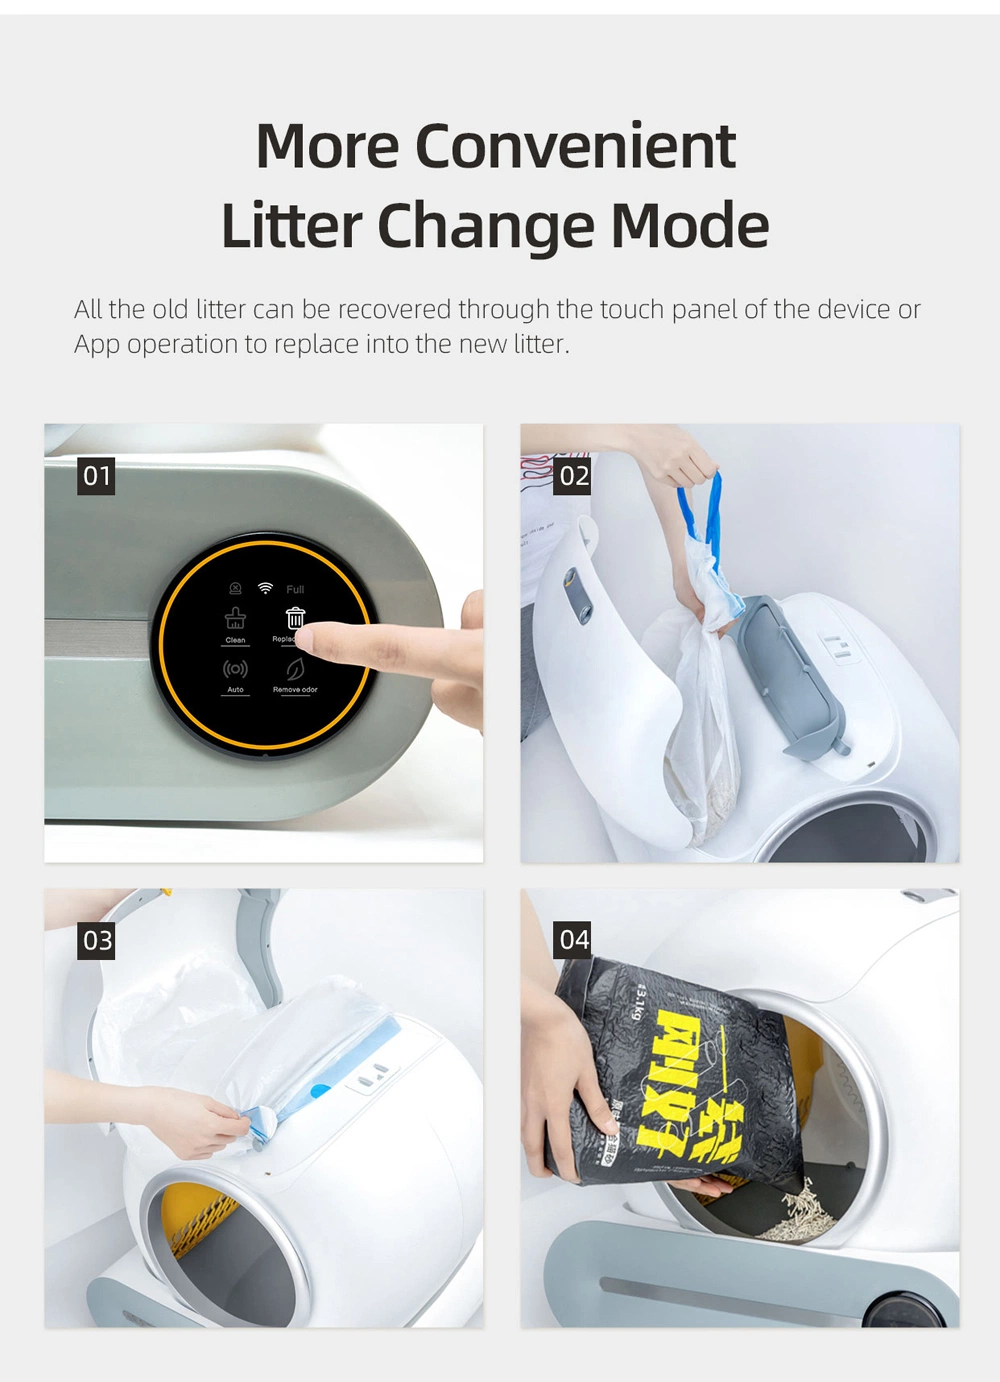 Wholesale Intelligent Cat Litter Toile Self-Cleaning Cats Litter Box